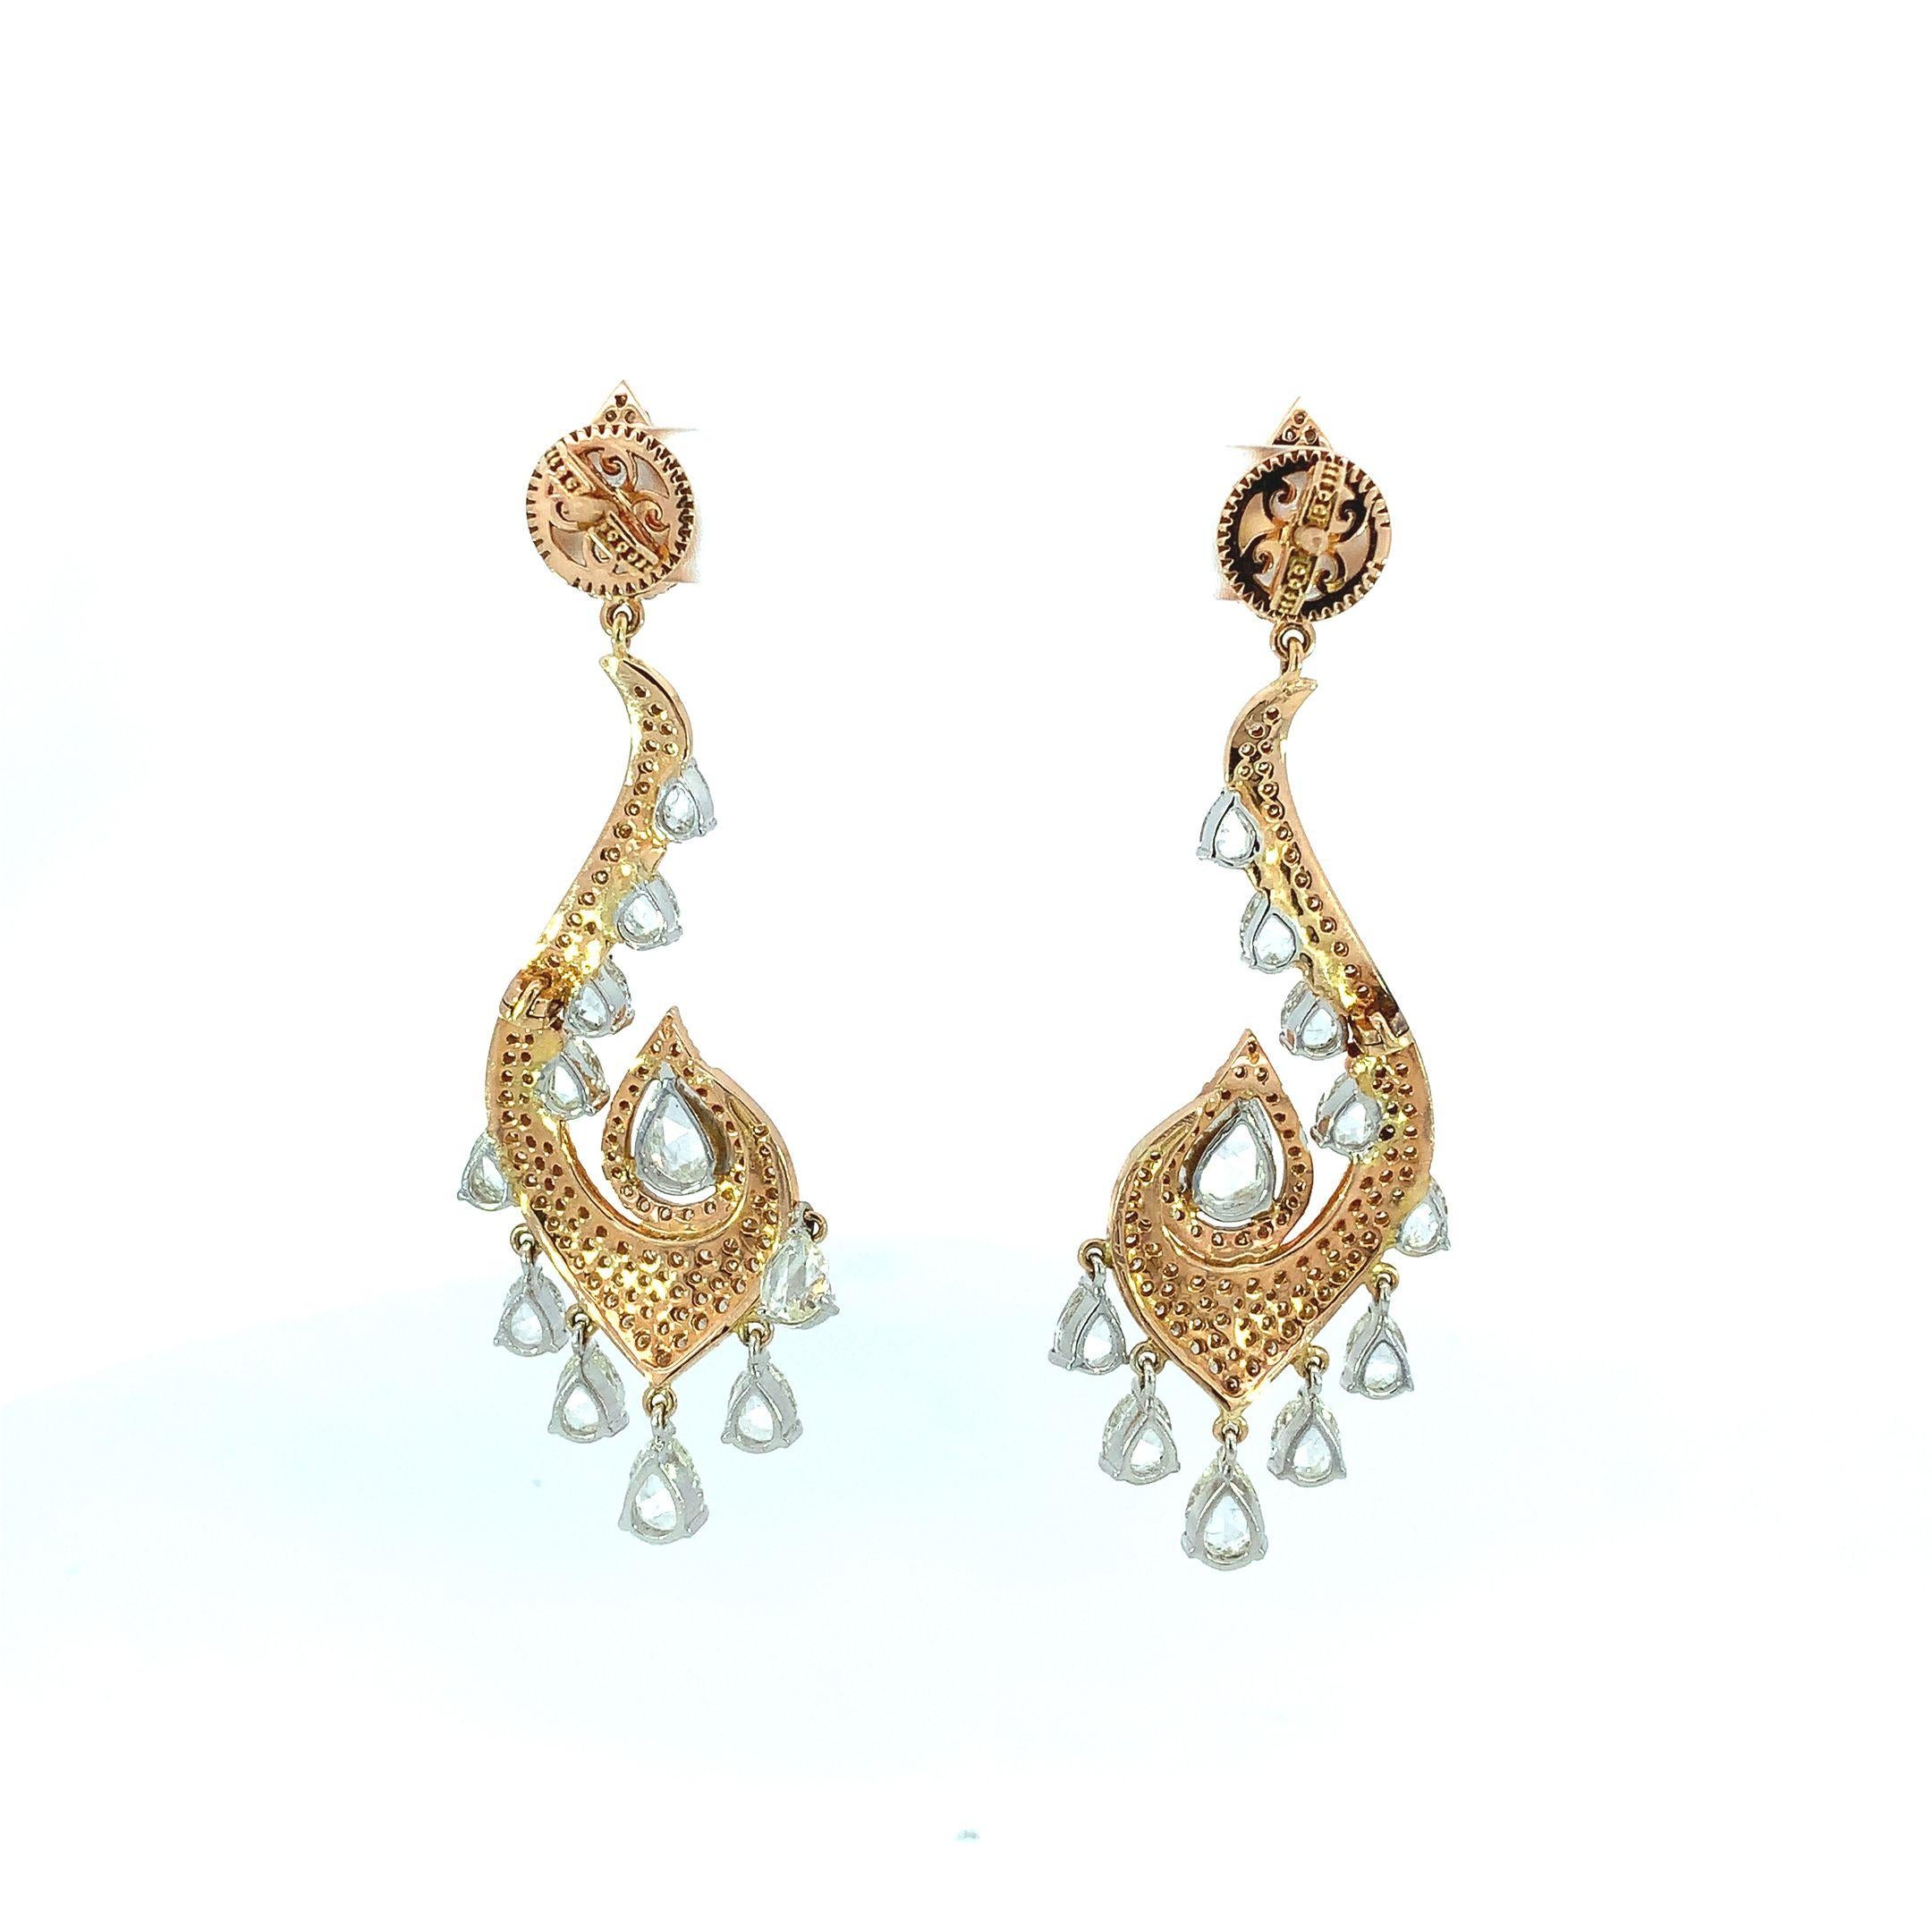 Step into a world of enchantment with these exquisite earrings. Boasting an intricate oriental paisley design that exudes elegance and allure, these earrings were crafted in lustrous 18K rose gold with a captivating swirl of intricate patterns